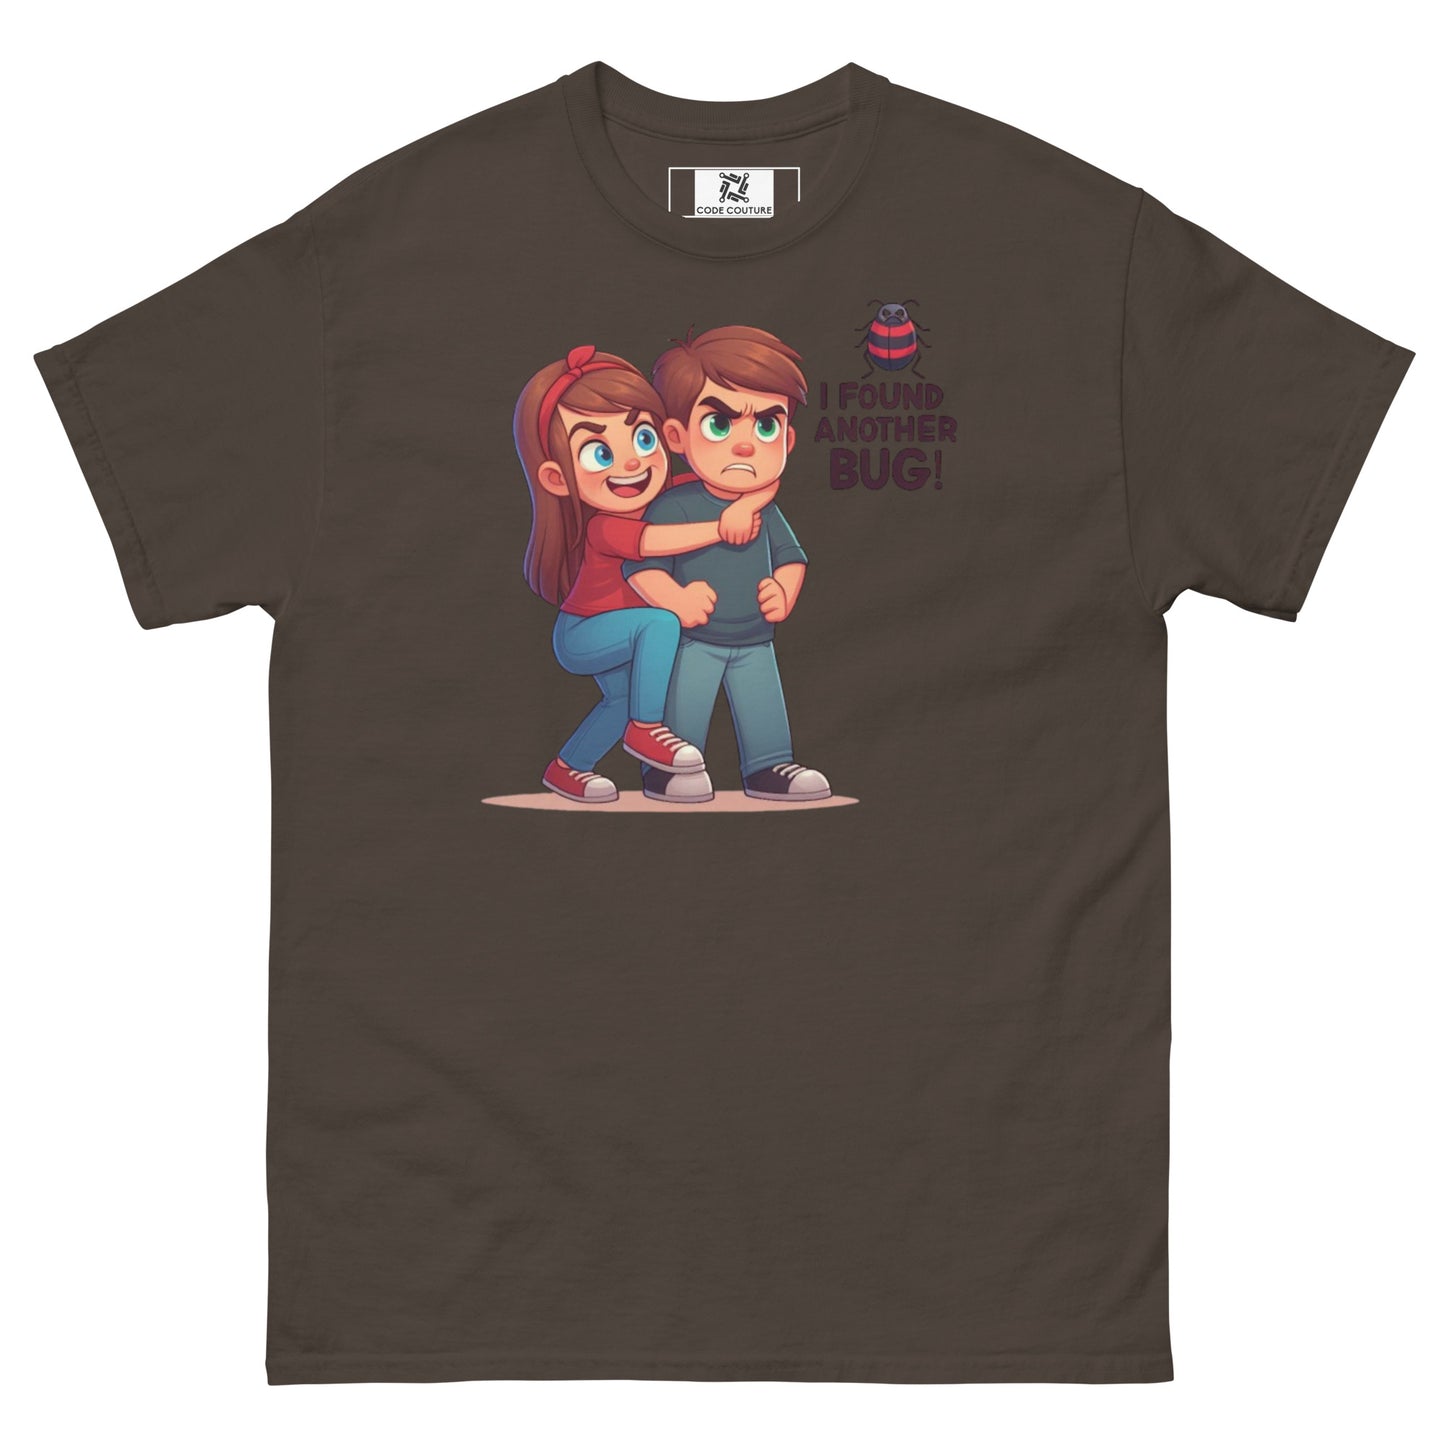 Found Another Bug classic tee - Dark